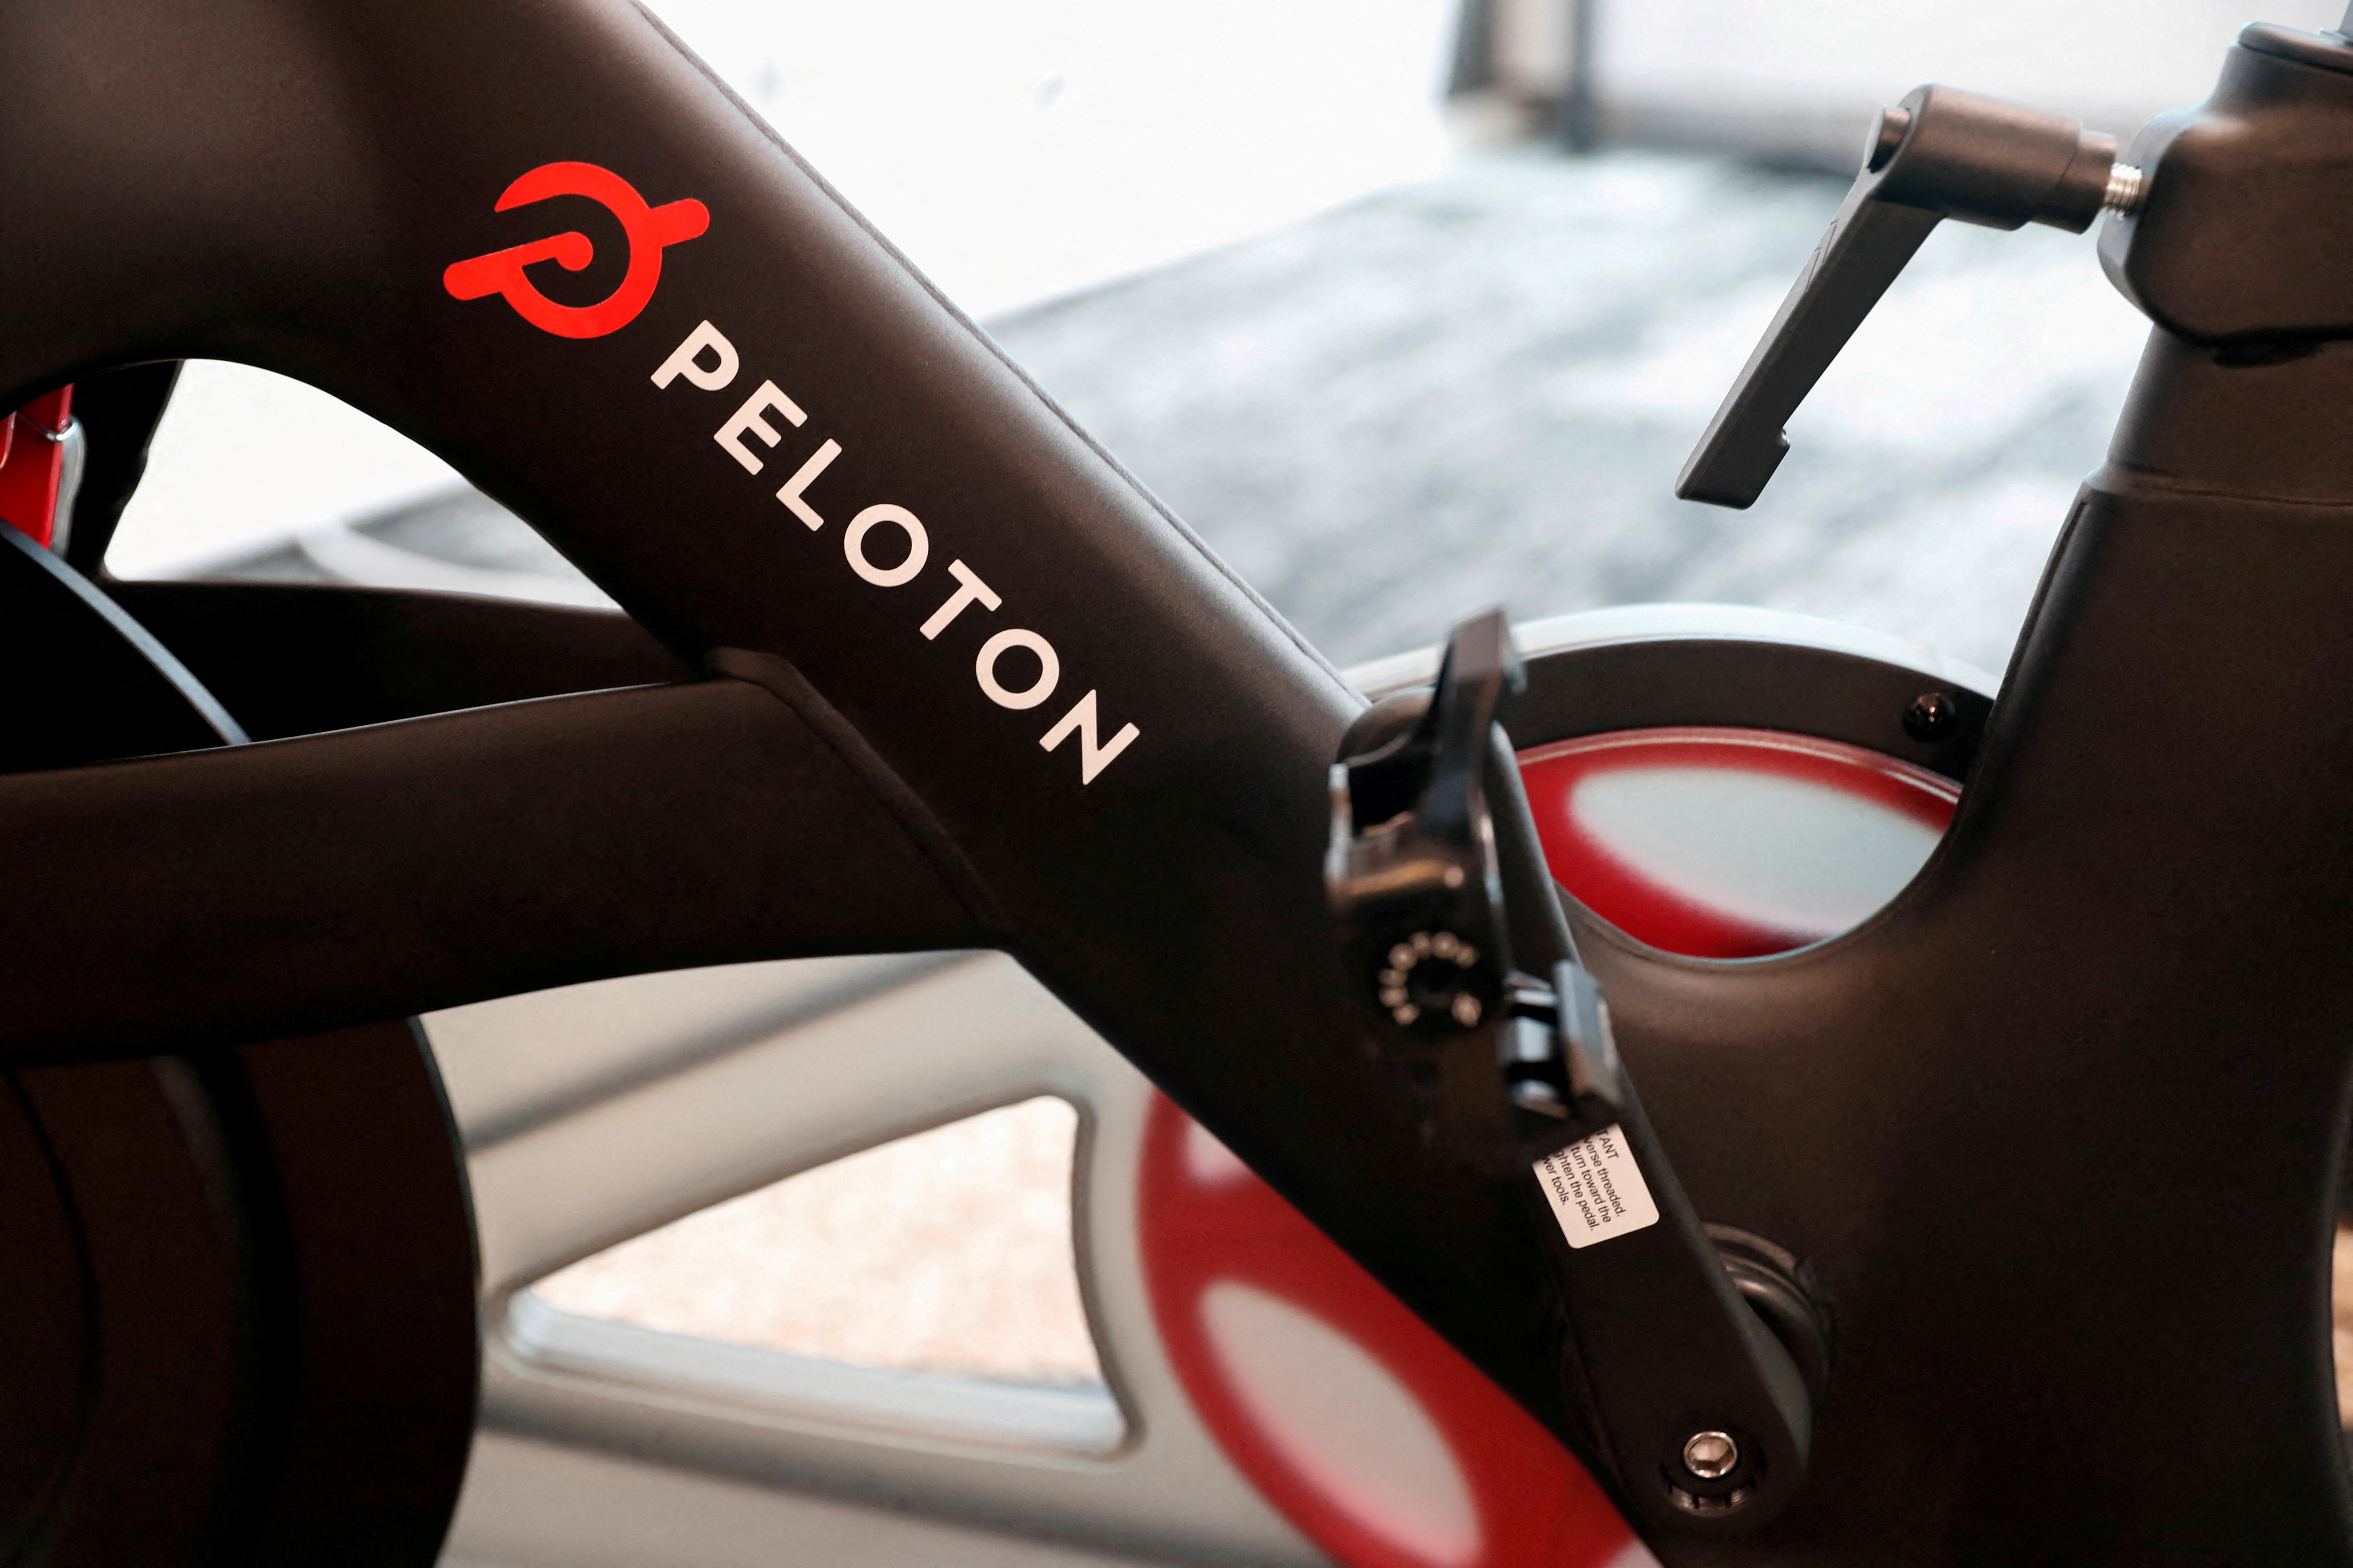 A Peloton exercise bike is seen after the ringing of the opening bell for the company's IPO at the Nasdaq Market site in New York City, New York, U.S., September 26, 2019. REUTERS/Shannon Stapleton